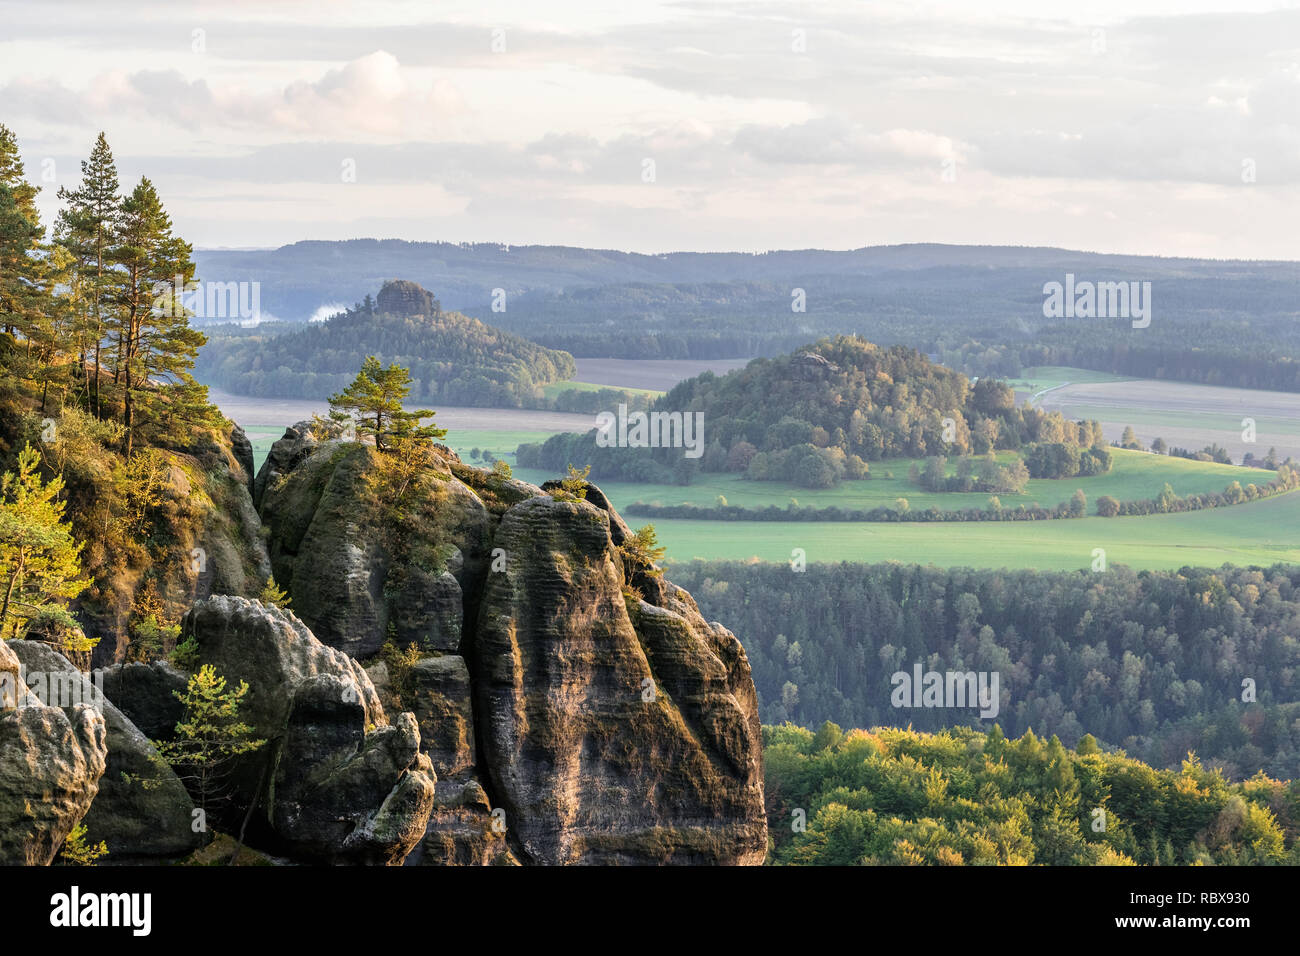 Elbe Sandstone Mountains - view to the mountains "Zirkelstein" and "Kaiserkrone", in the foreground a rock formation with trees in autumn color, light Stock Photo